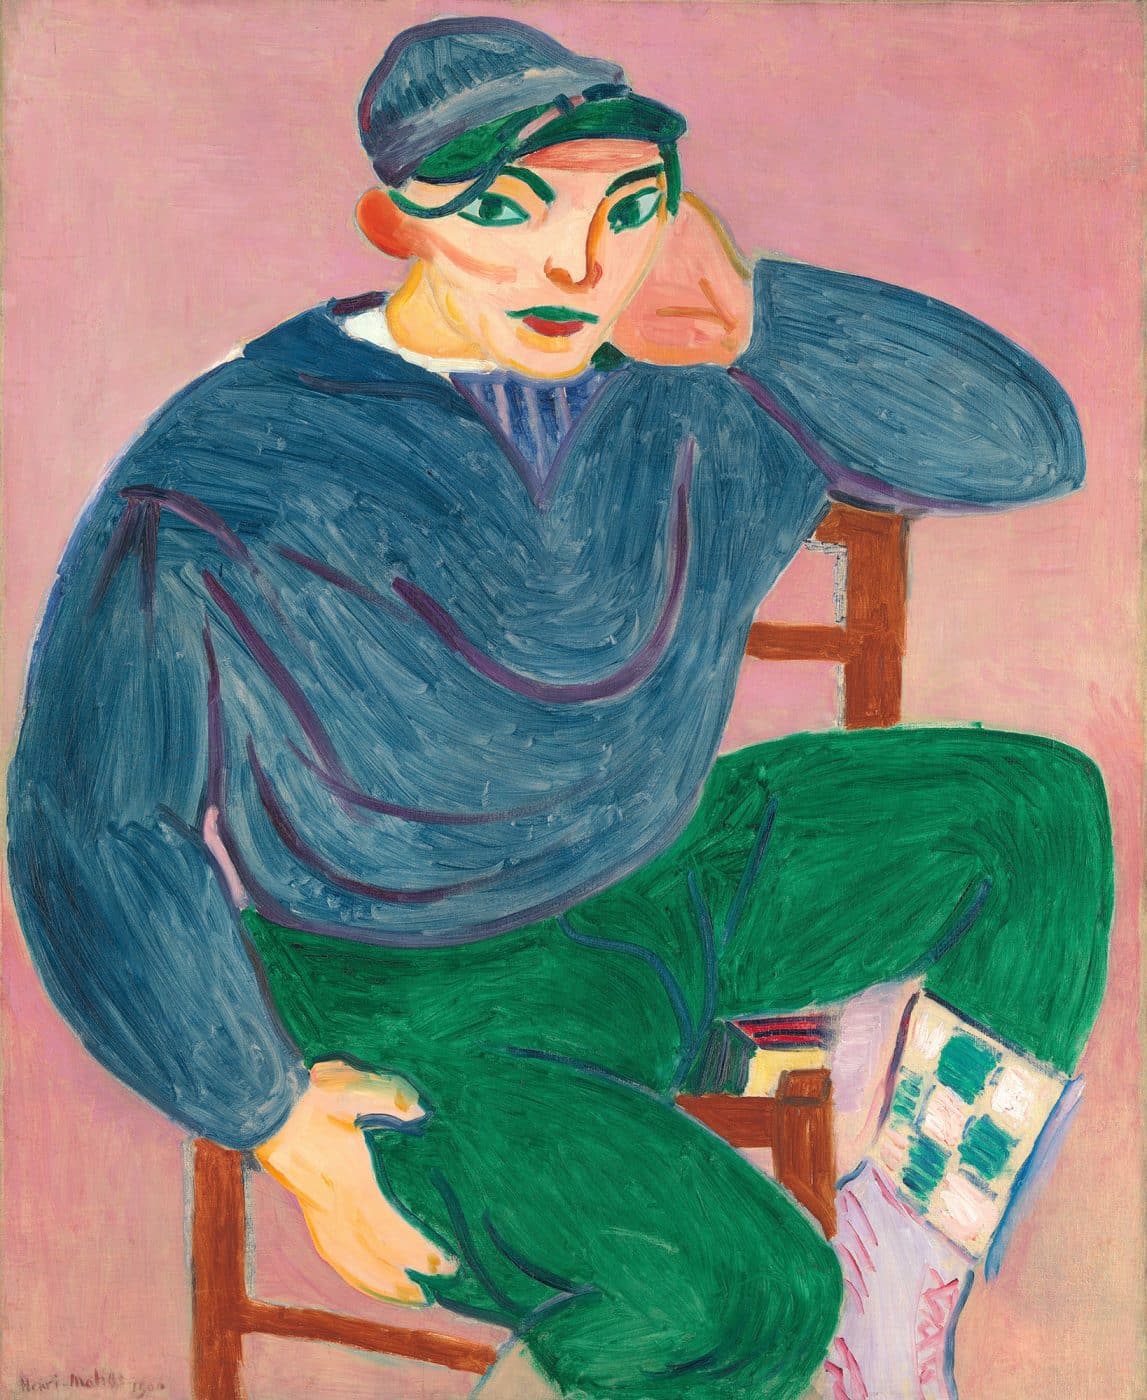 Young Sailor II, 1906, by Henri Matisse